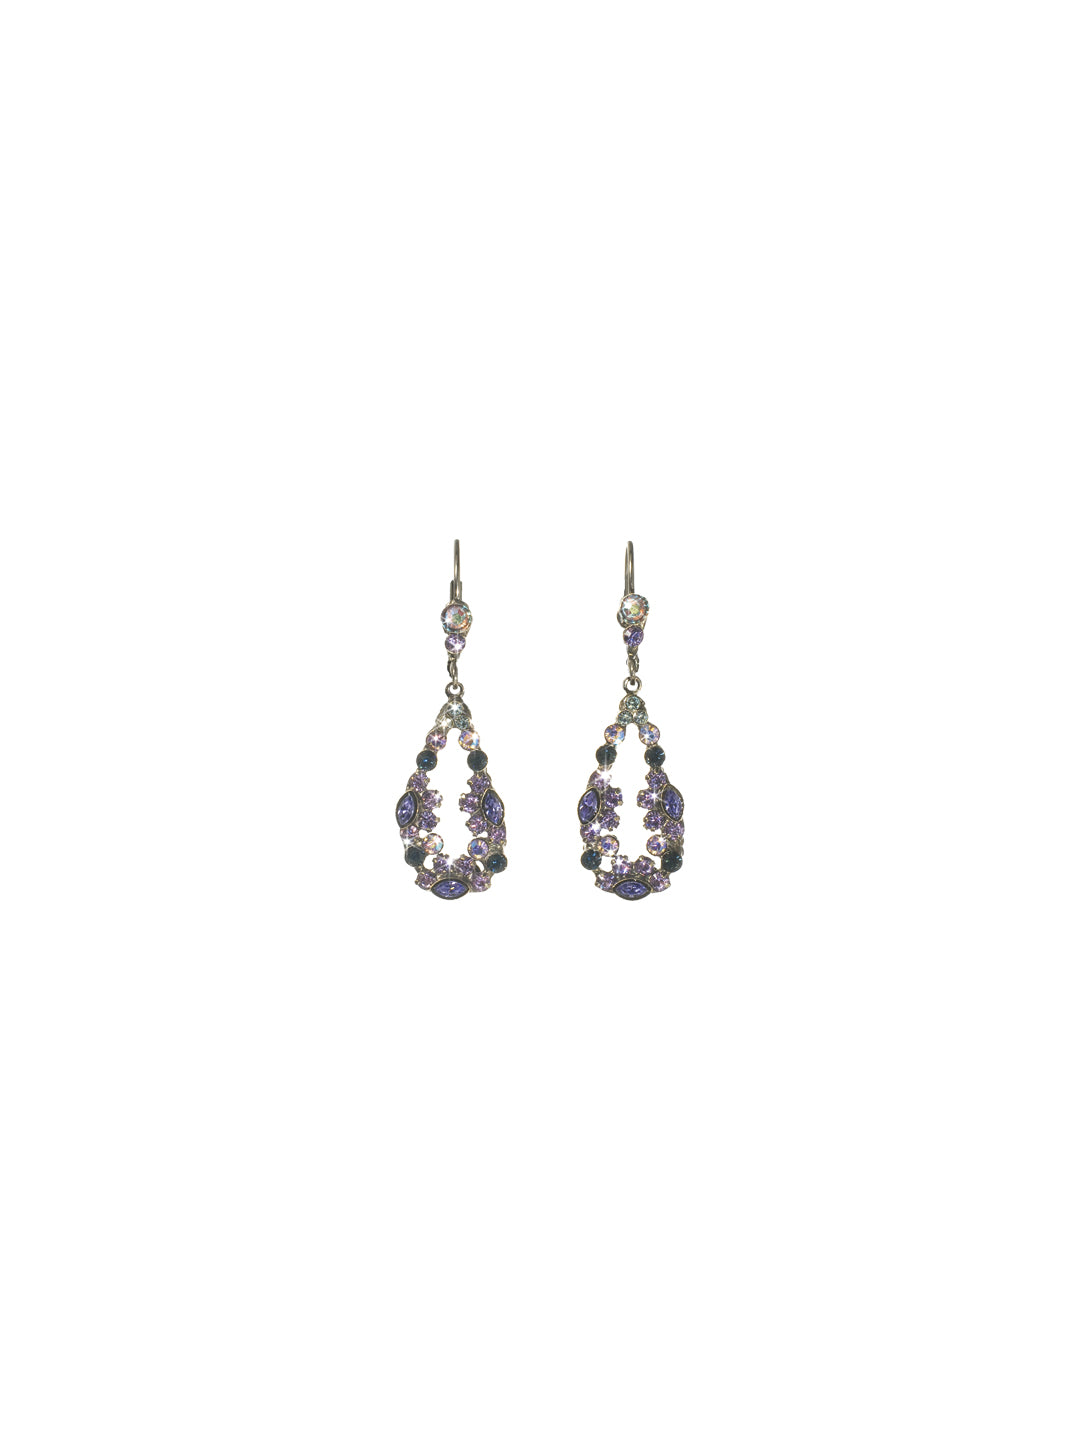 Floral Teardrop Earring - ECA27ASHY - There's no end to this sparkle! These teardrop earrings are clustered with crystal bouquets in round and marquise cut stones that descend in a 1 3/4 inch drop. Secured with a hinged back clasp, these earrings are a treasure you'll never want to let go. From Sorrelli's Hydrangea collection in our Antique Silver-tone finish.